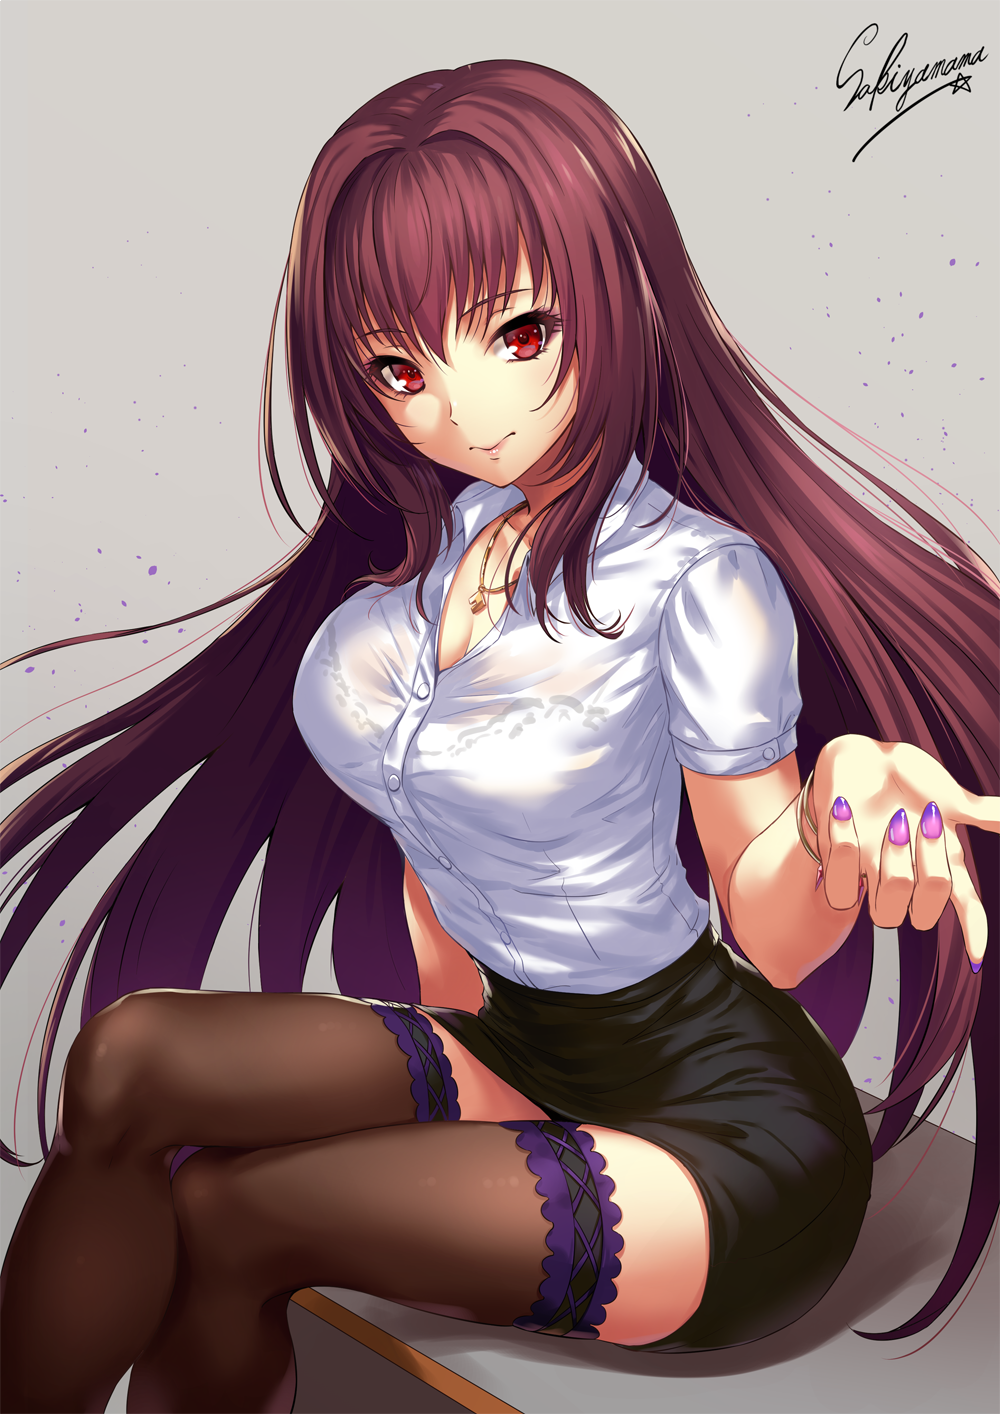 Thicc lady. Scathach панцу. Scathach эччи. Scathach этти. Scathach Fate Grand секретарша.